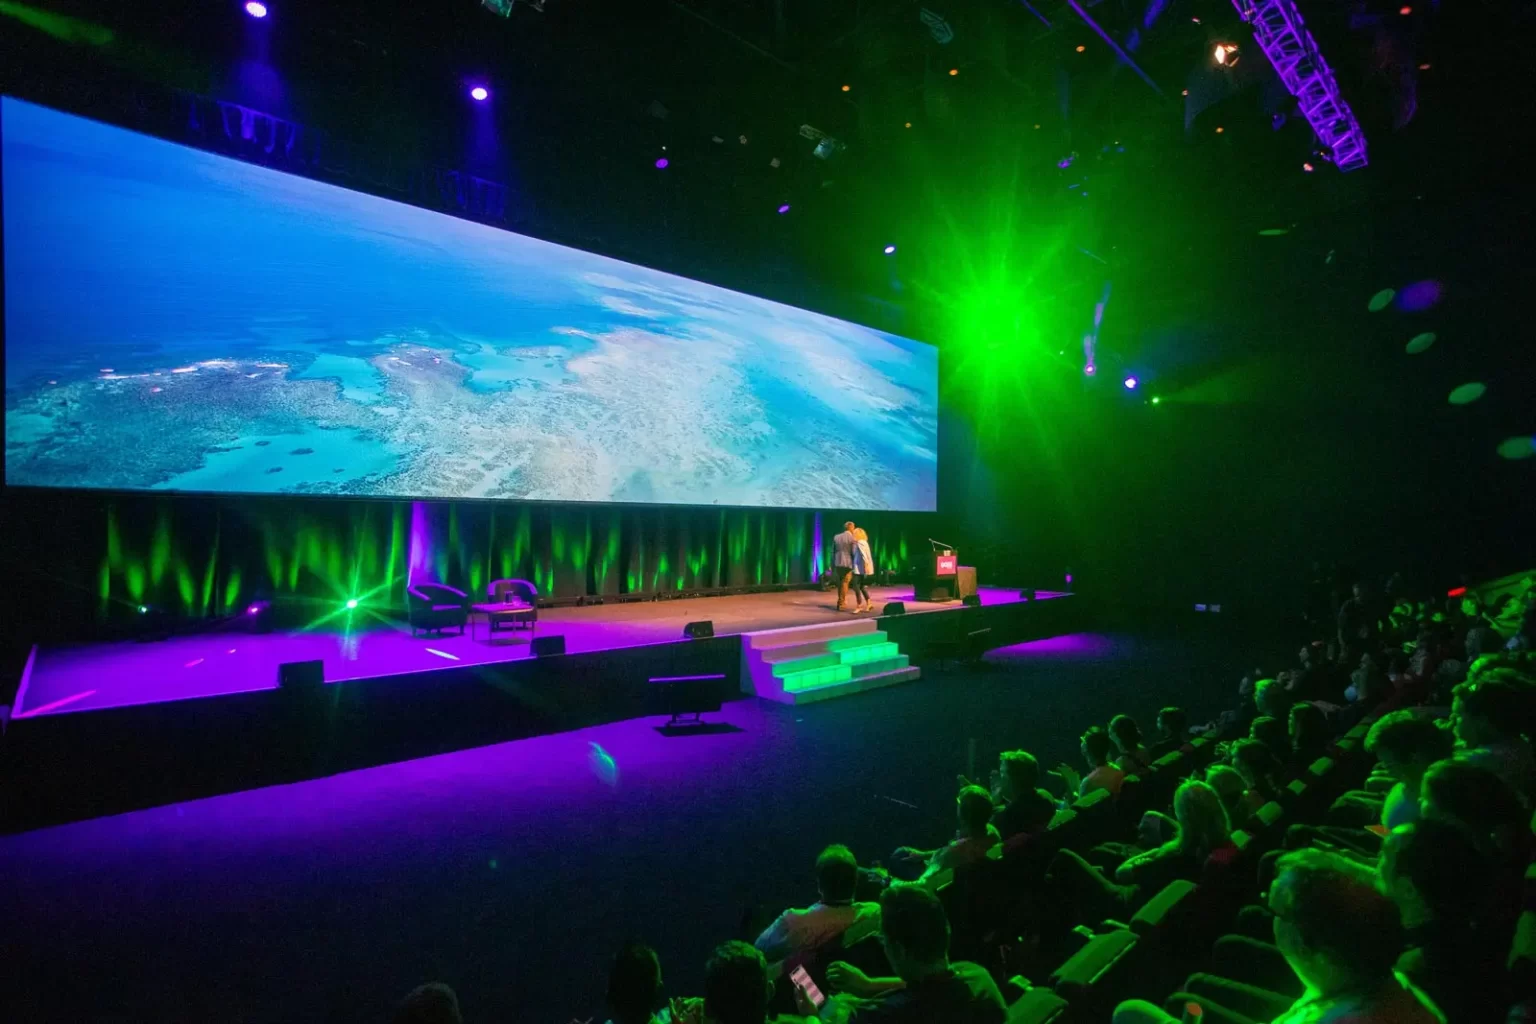 A man presents on a large stage with a panoramic screen displaying an aerial view of a coastal landscape, under green and purple stage lighting, to an audience in a darkened room.